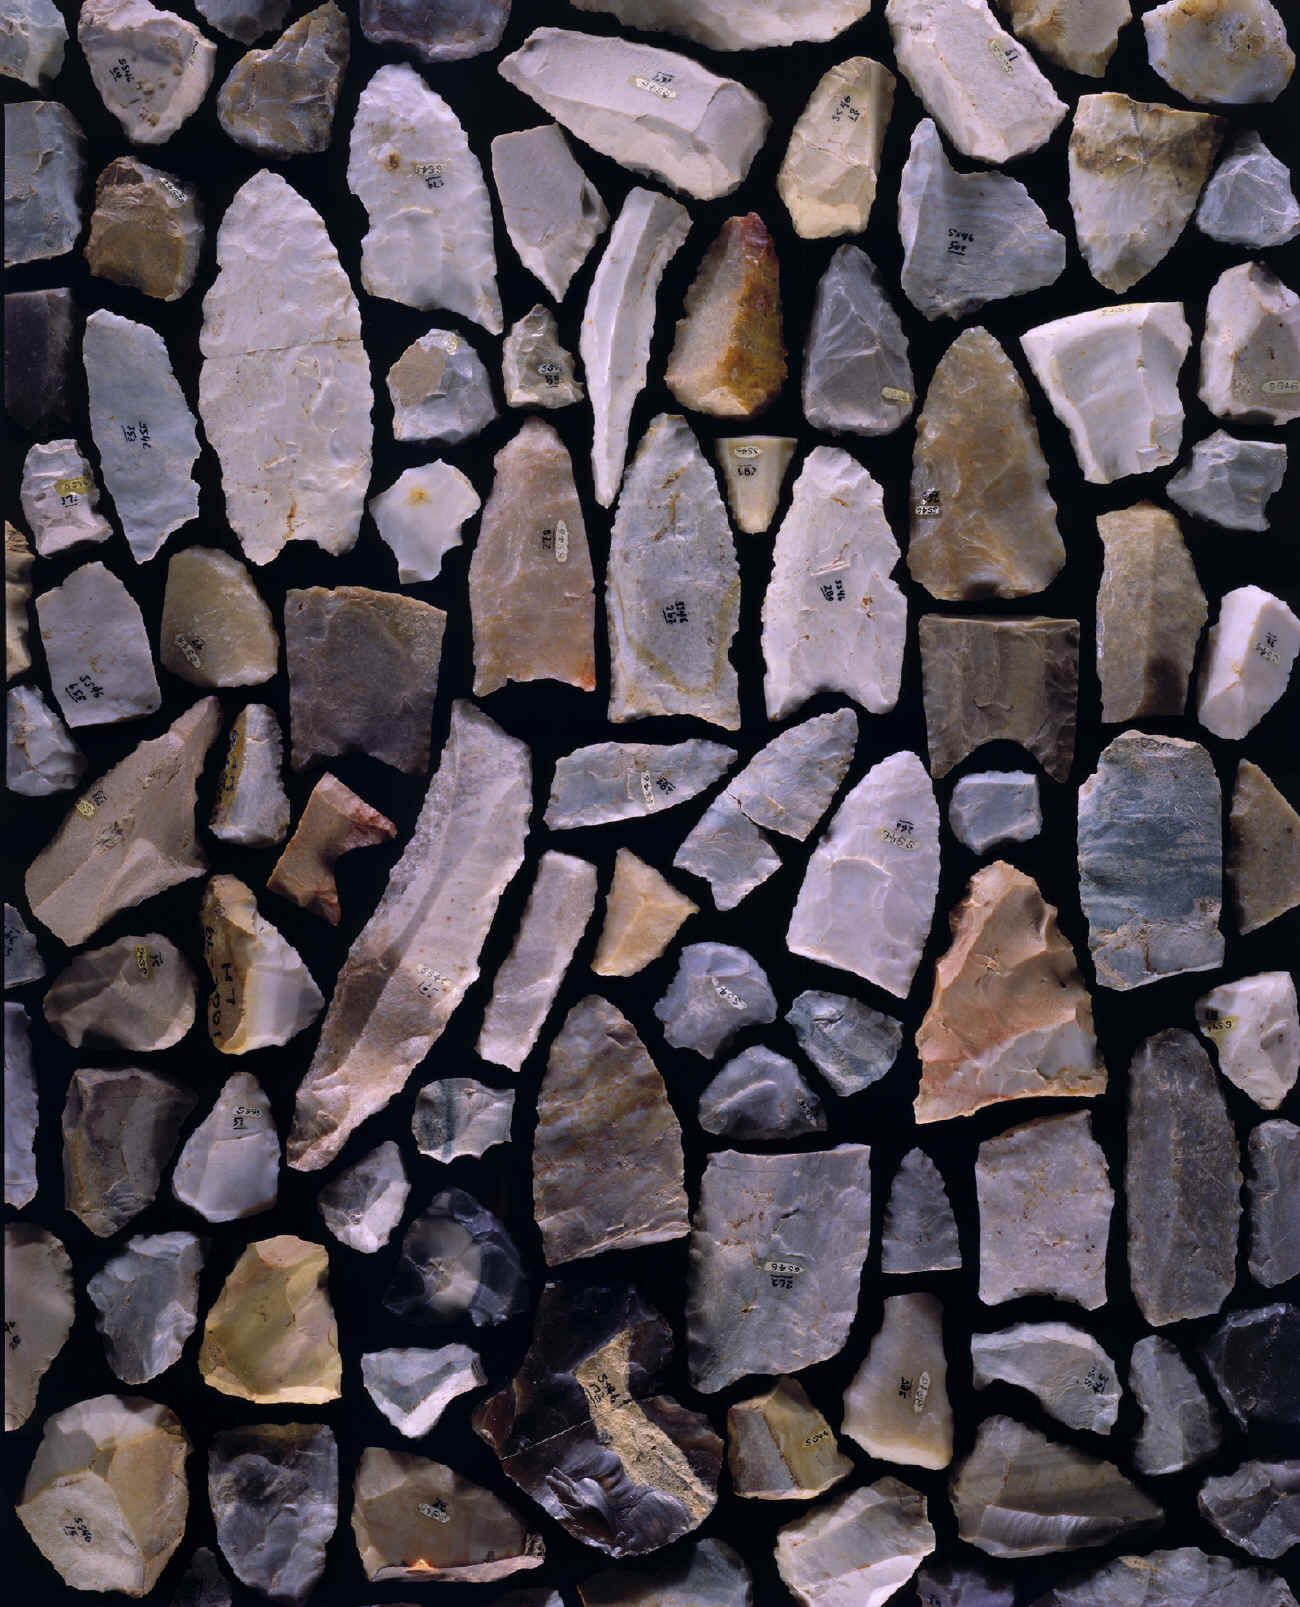 One Hundred stone artifacts from the Bostrom Clovis site.